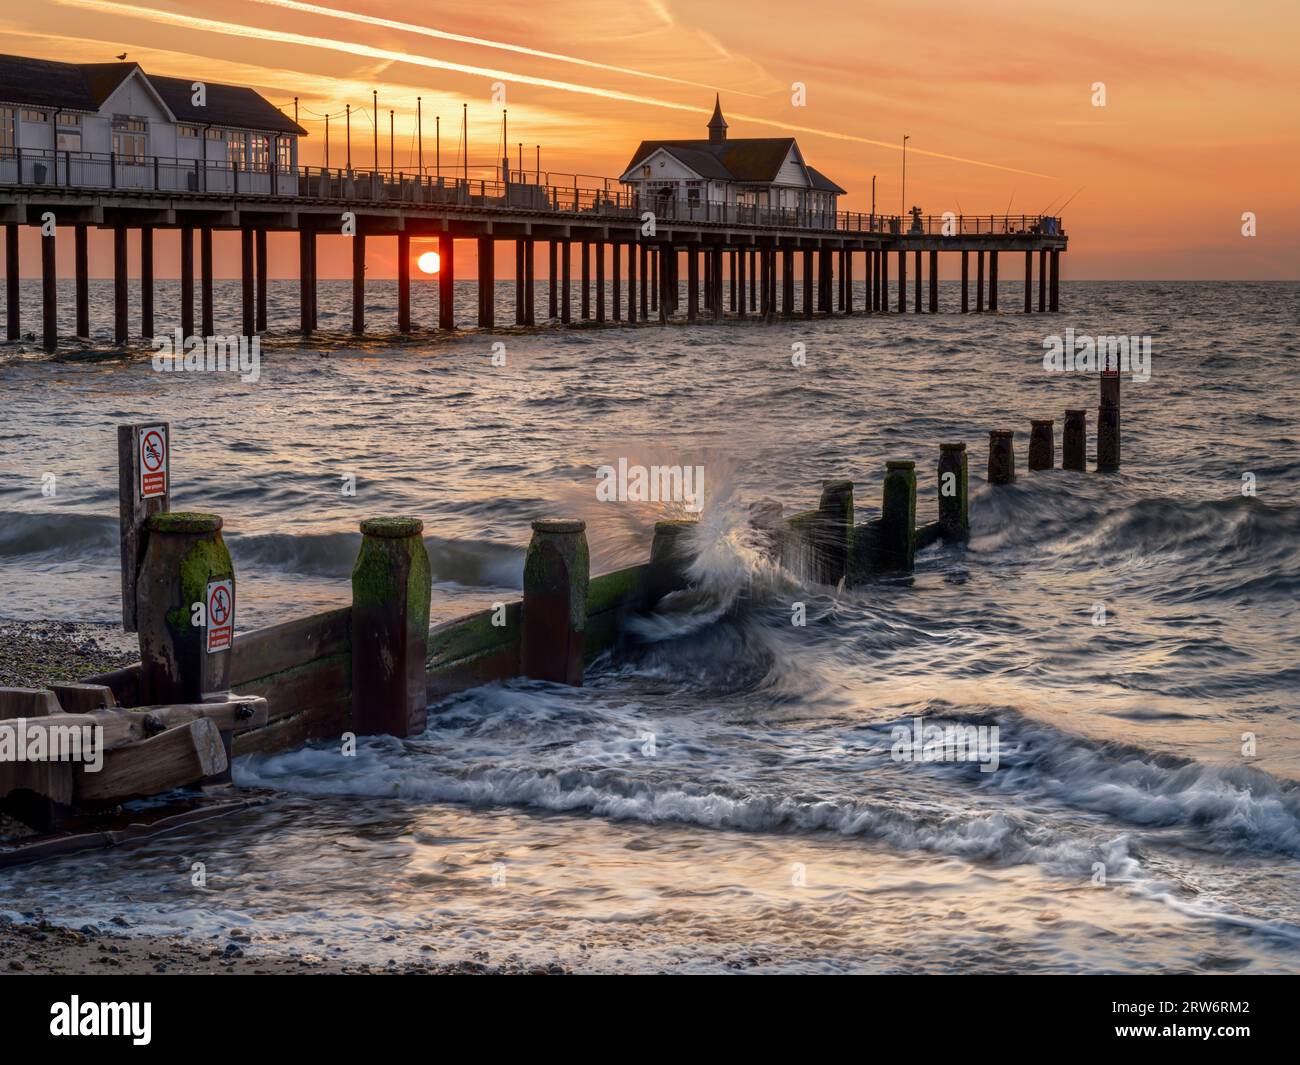 Friday 15th September 2023. Southwold, Suffolk, England - The sun rises behind the distinctive pier at Southwold at the start of another warm late sum Stock Photo